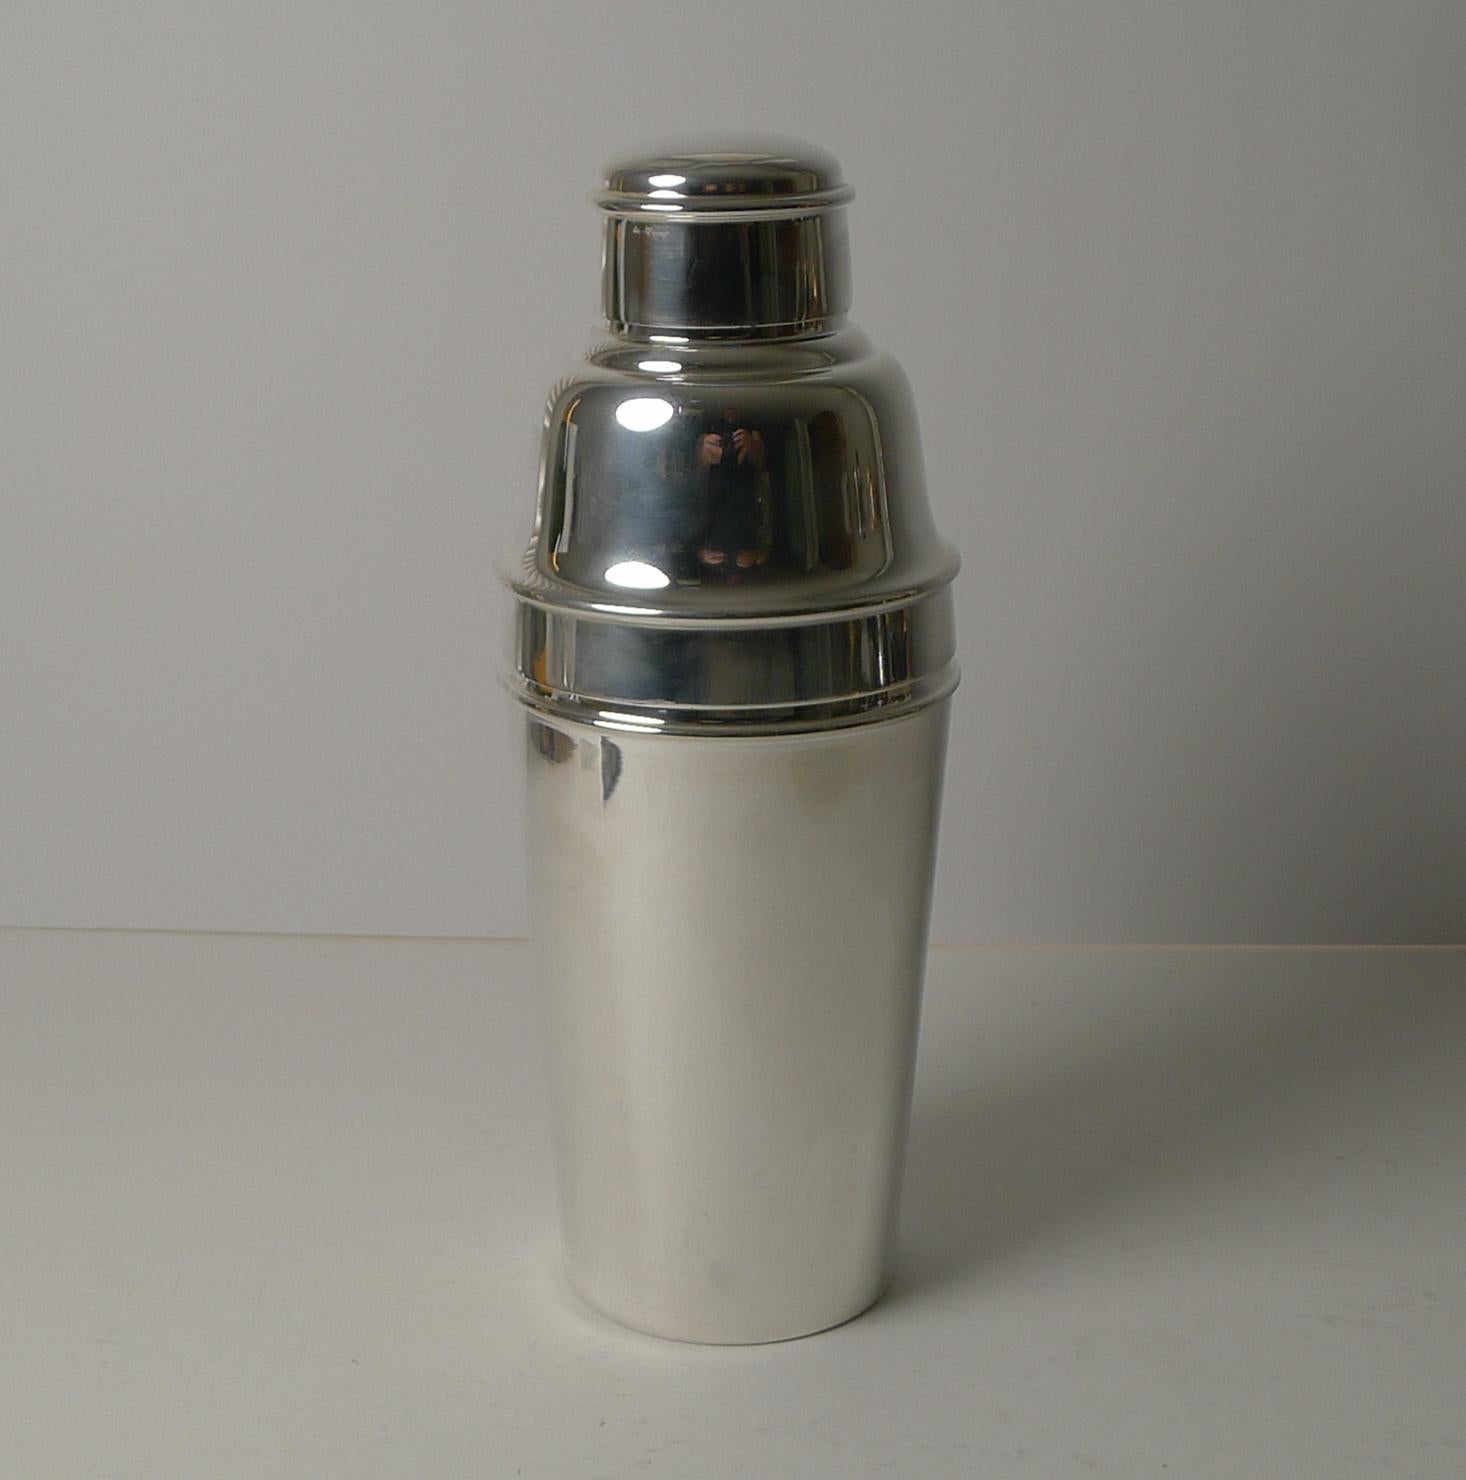 A handsome 1 pint cocktail shaker in silver plate by the top-notch silversmith, Mappin & Webb of London and Sheffield. This one is lucky enough to have an integral ice breaker inside the top portion, always highly desirable and sought-after.

The